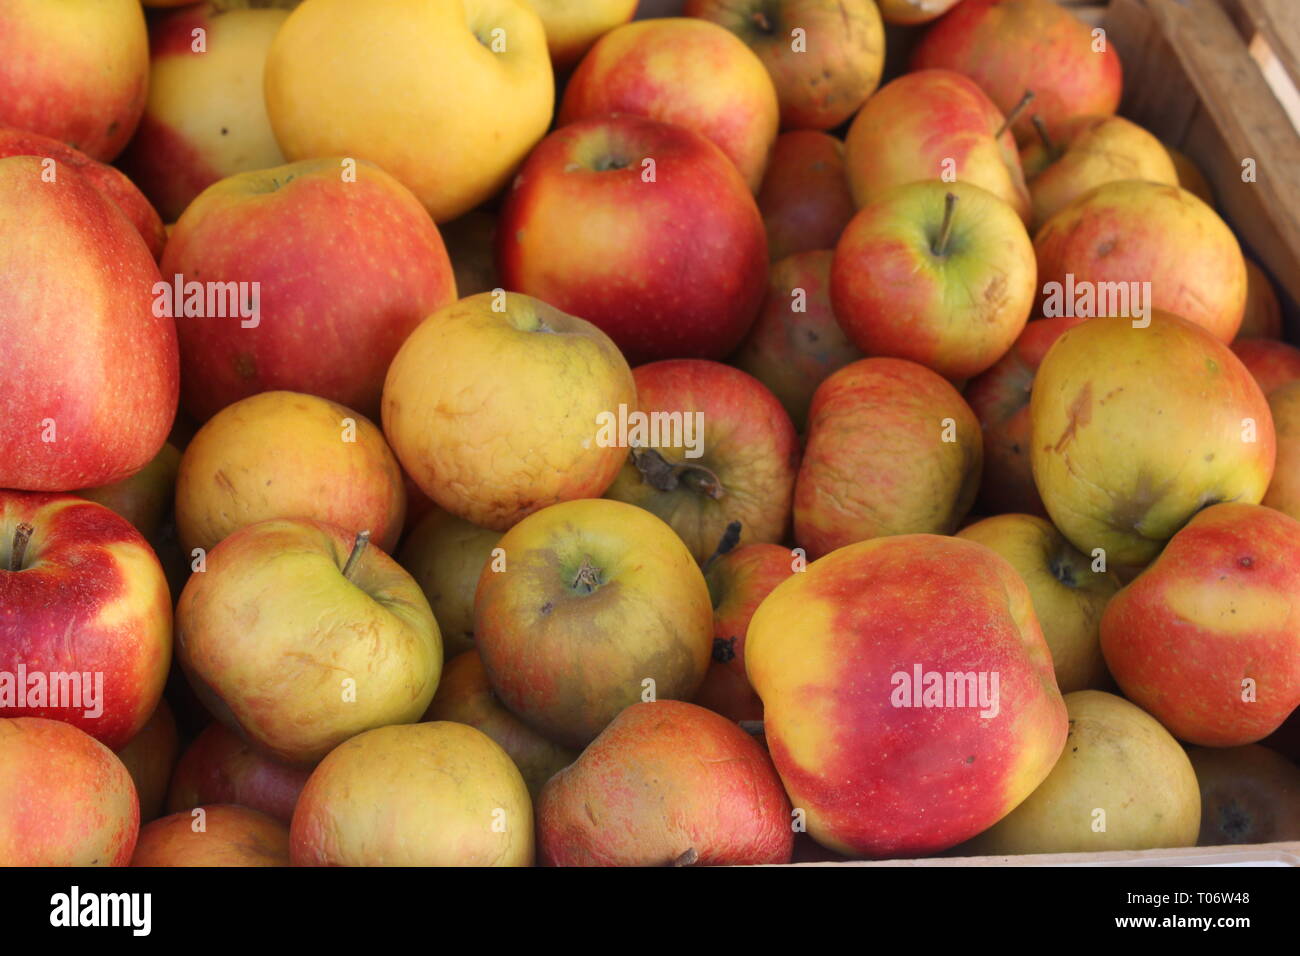 Close-up of Elstar apples with faults. Authentic product in unsorted sizes and fresh picked from trees. Stock Photo